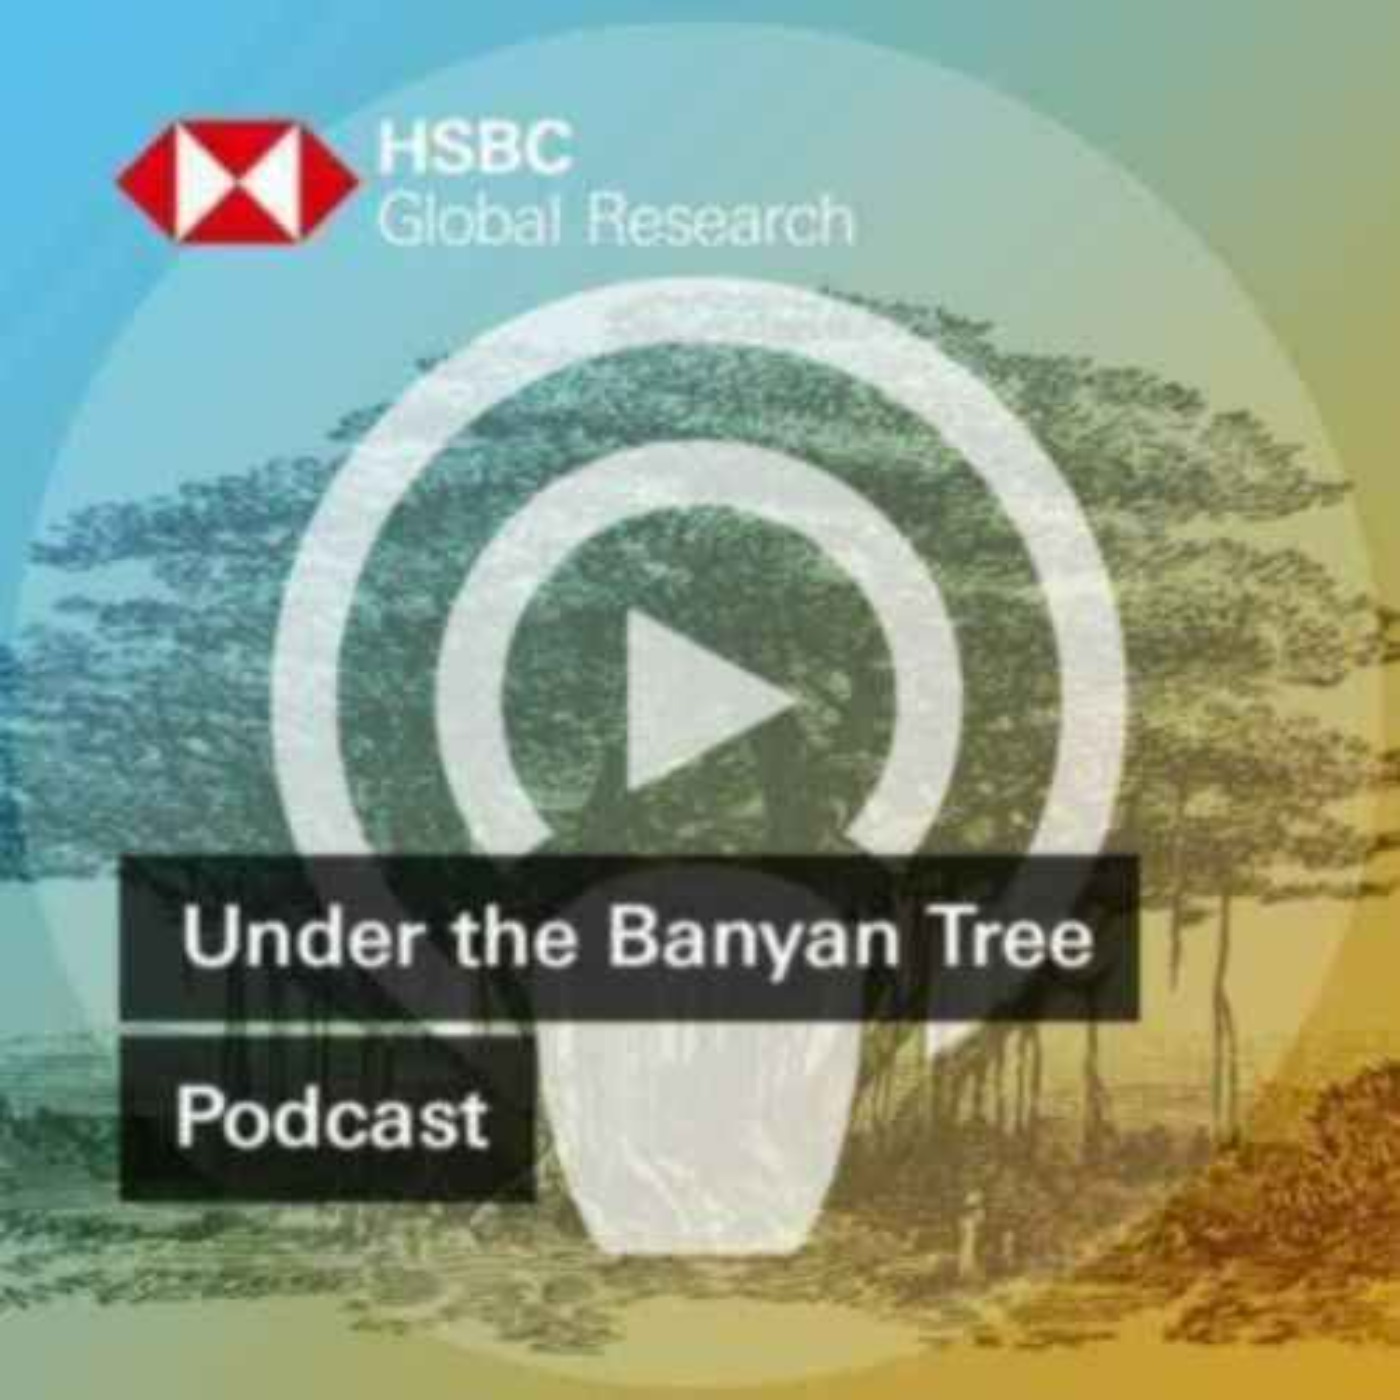 Under the Banyan Tree - If China's slowing, what's driving commodities?